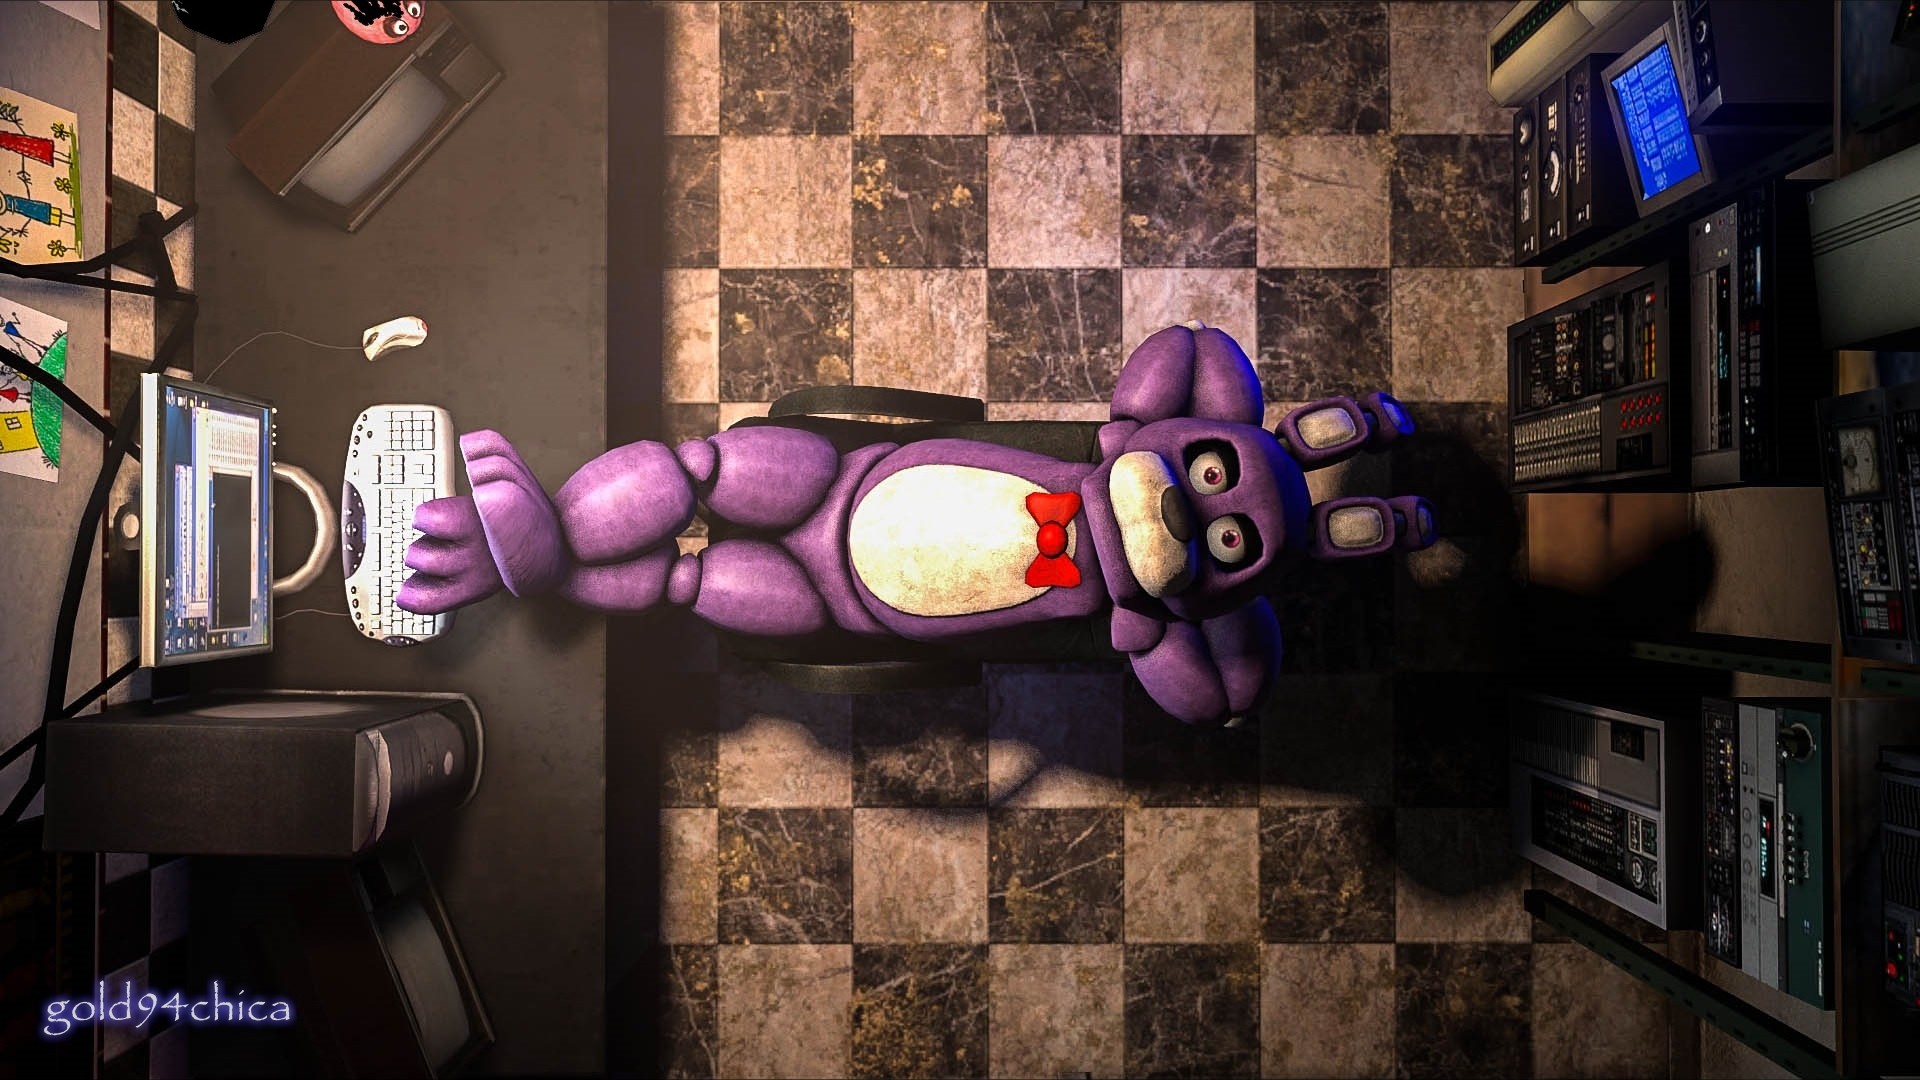 1920x1080 (Bonnie SFM Wallpaper) by gold94chica on .